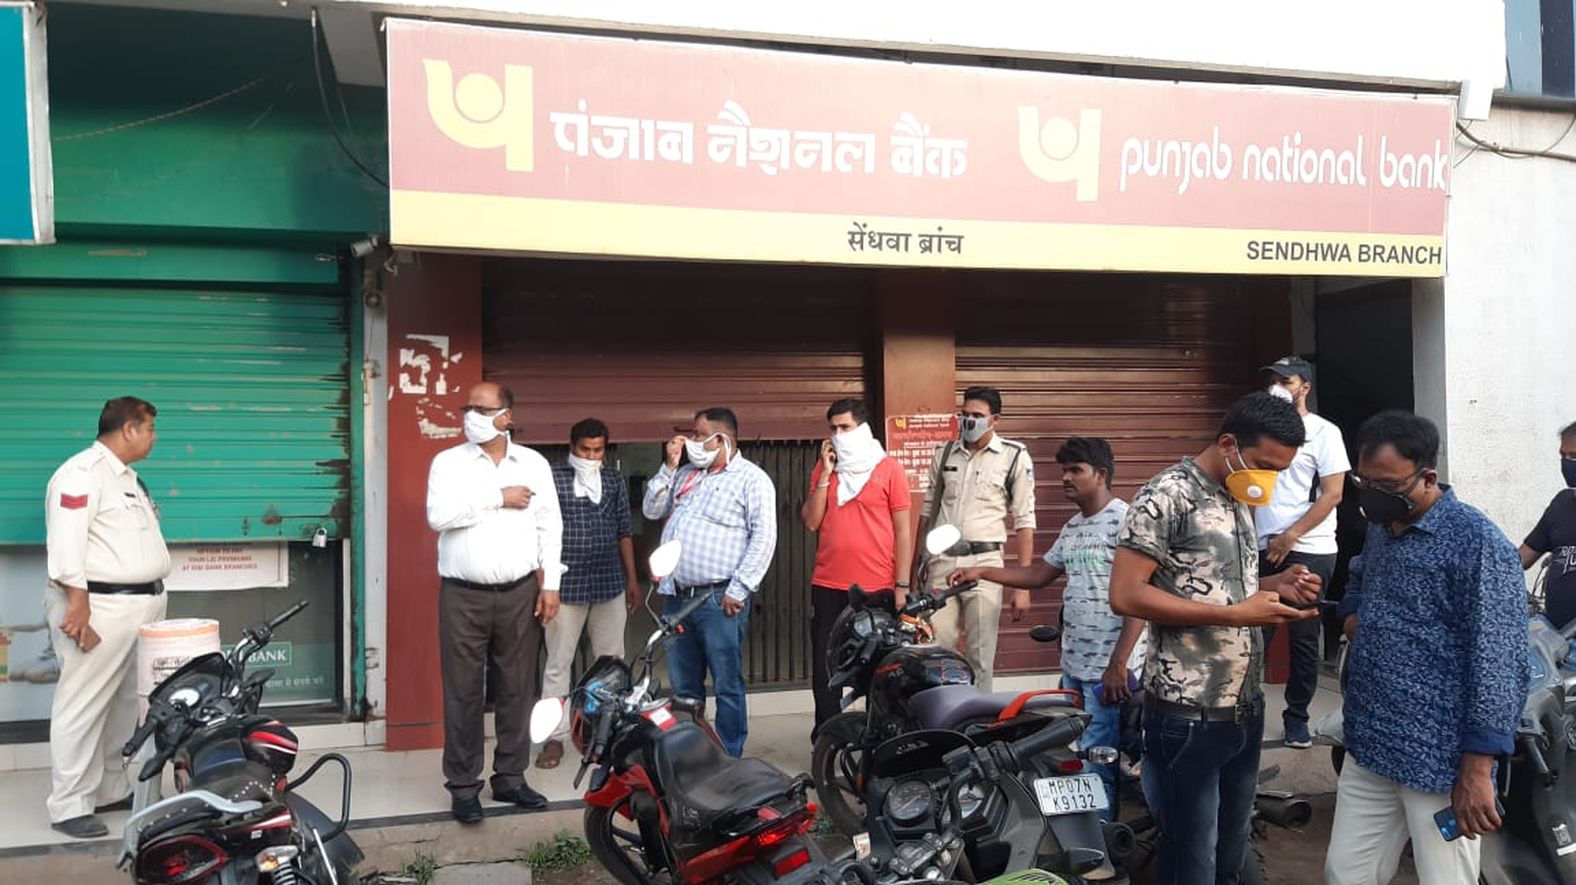 Attempted robbery in Punjab National Bank Sendhwa